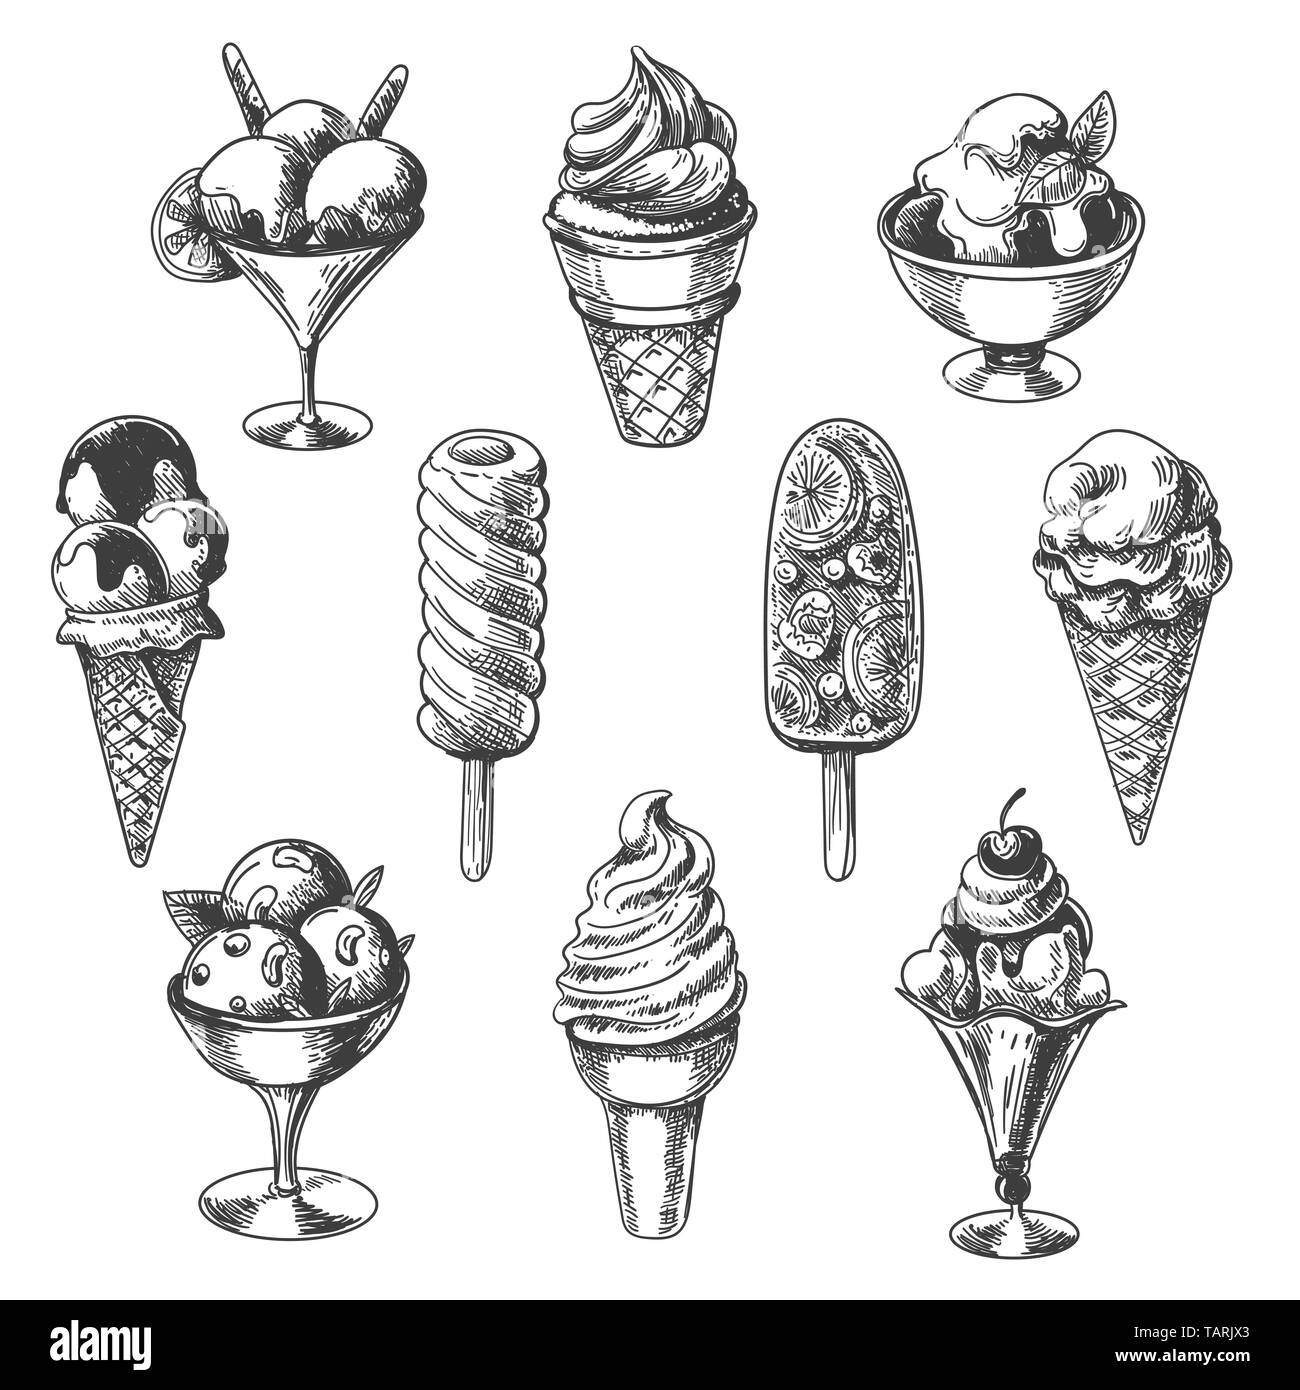 Vintage ice cream. Sketch icecream objects, hand drawn ice creams pie and stick, vanilla cone and sundae bowl desserts, vector illustration Stock Vector